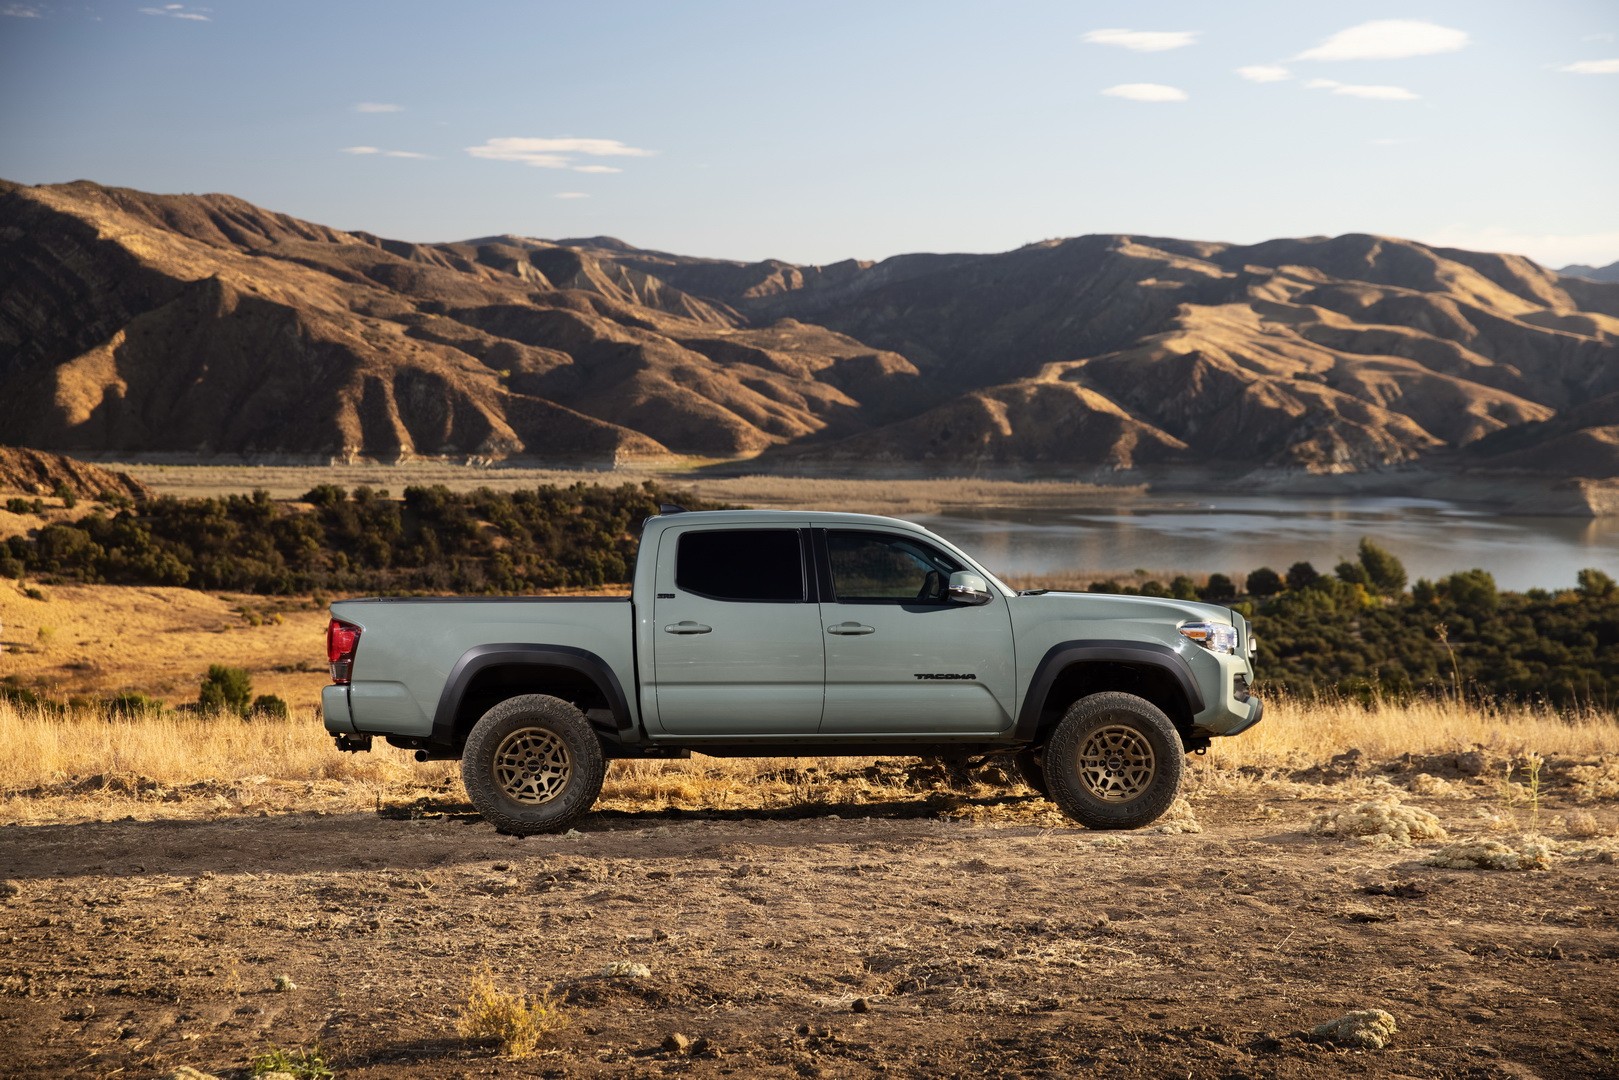 New 2022 Toyota Tacoma Trail Edition With Factory Lift Kit Is Ready for